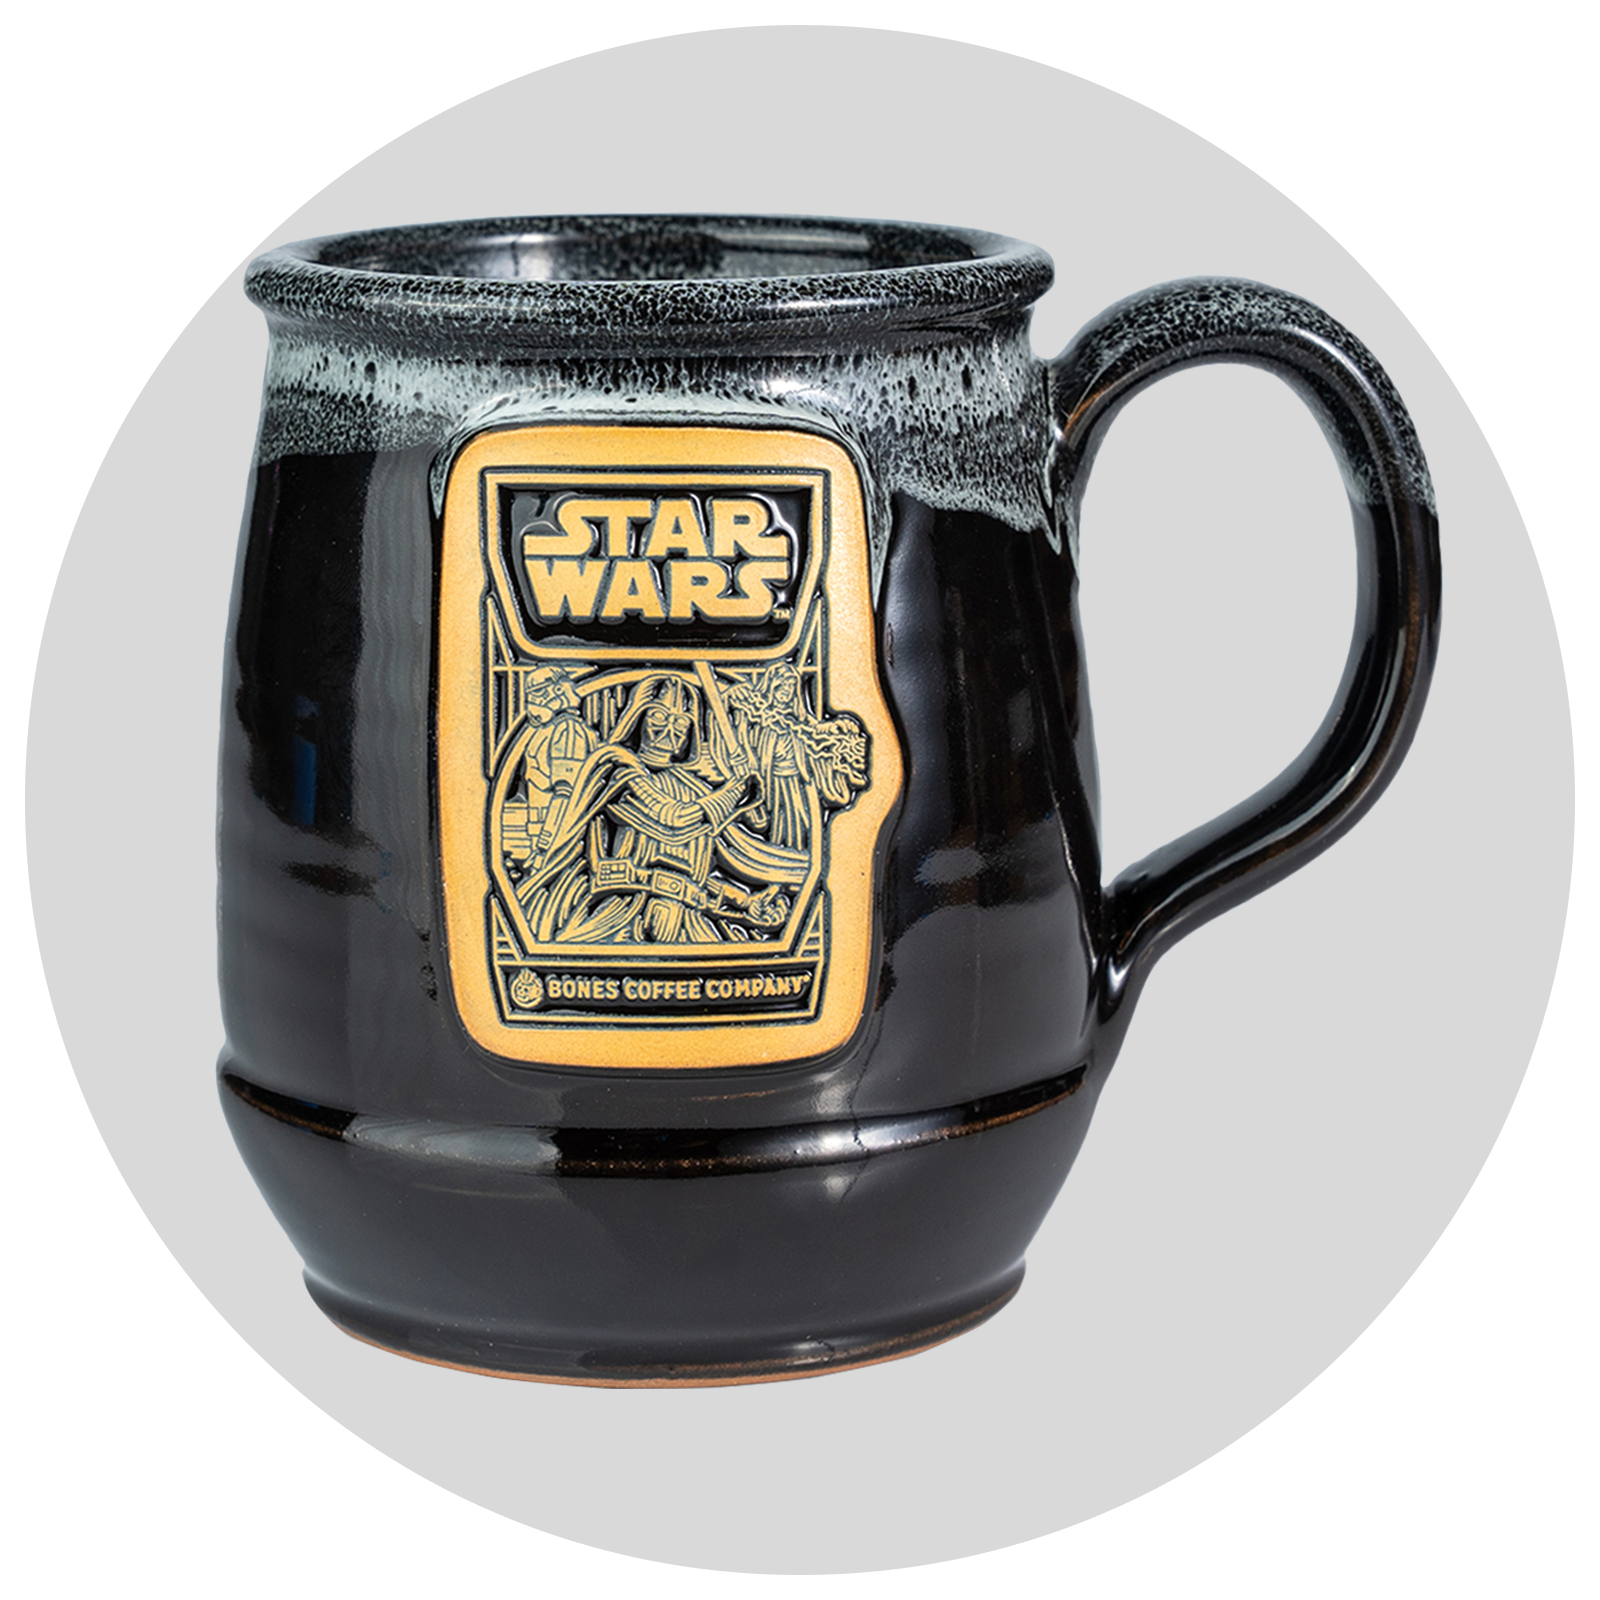 The front of the Bones Coffee Company Dark Side Chocolate Truffle hand thrown mug with the Dark Side Chocolate Truffle coffee art on the golden medallion. The mug is black colored with a white glaze on top. Behind it is a gray circle.